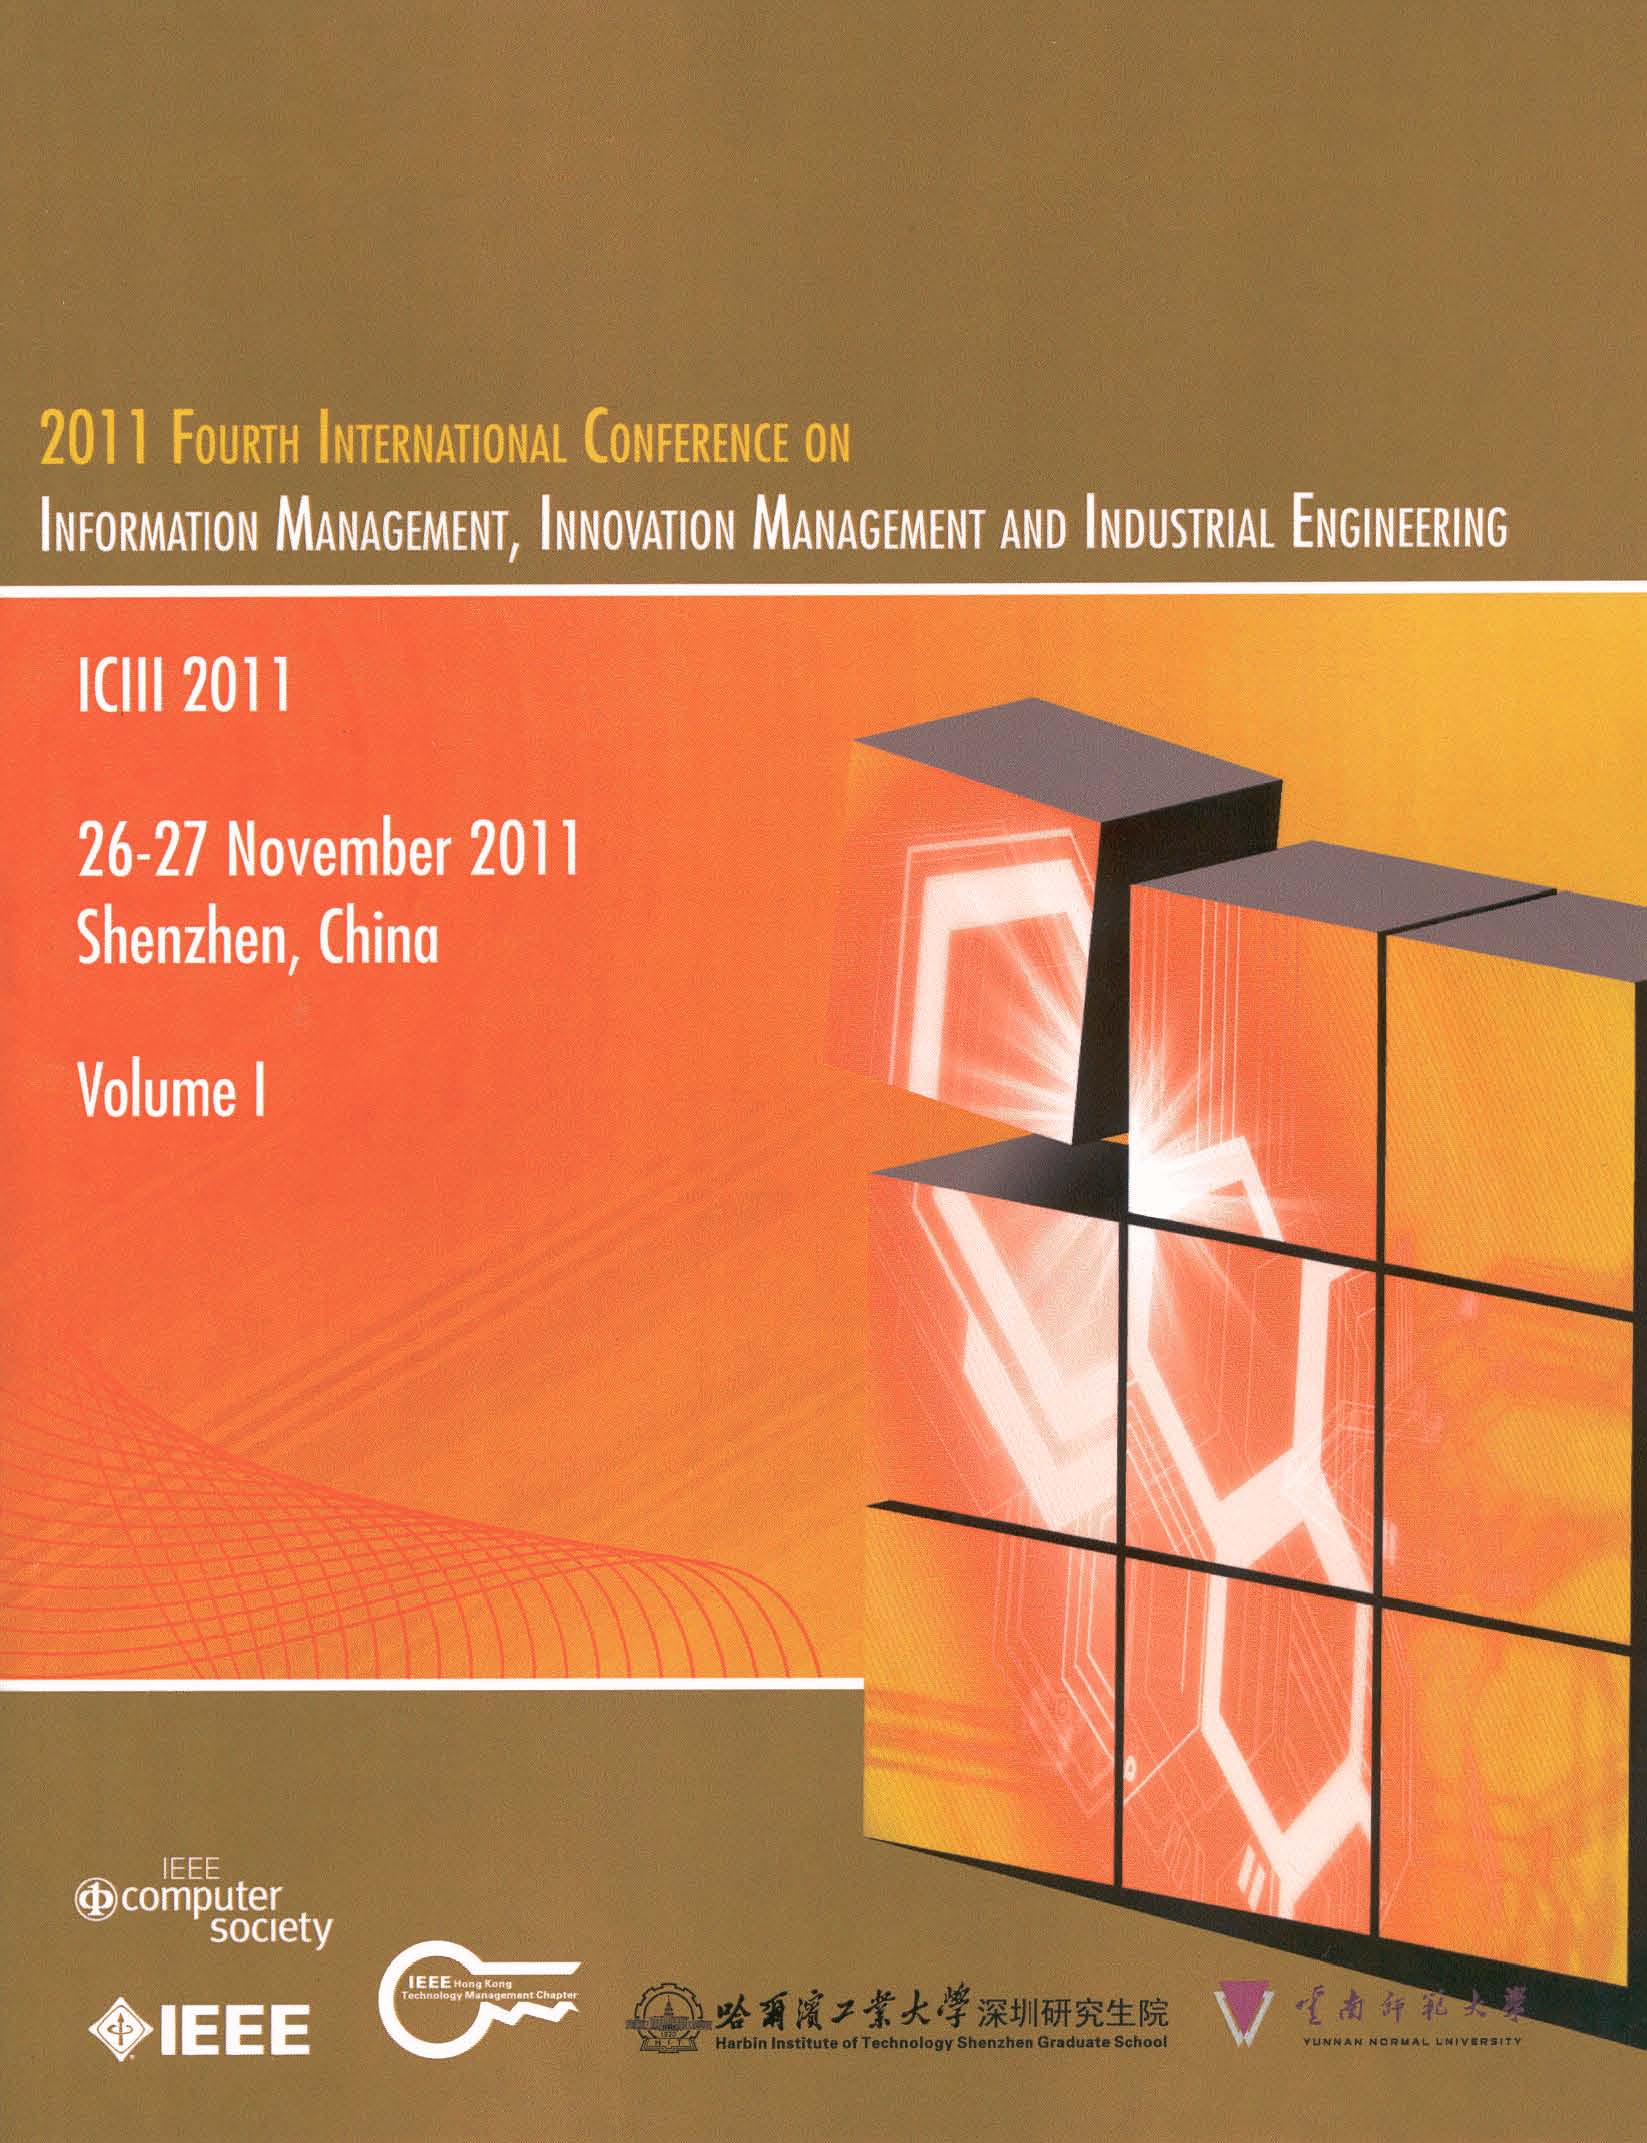 Proceedings of 2011 Fourth International Conference on Information Management, Innovation Management and Industrial Engineering (ICIII 2011). 26-27 November 2011, Shenzhen, China